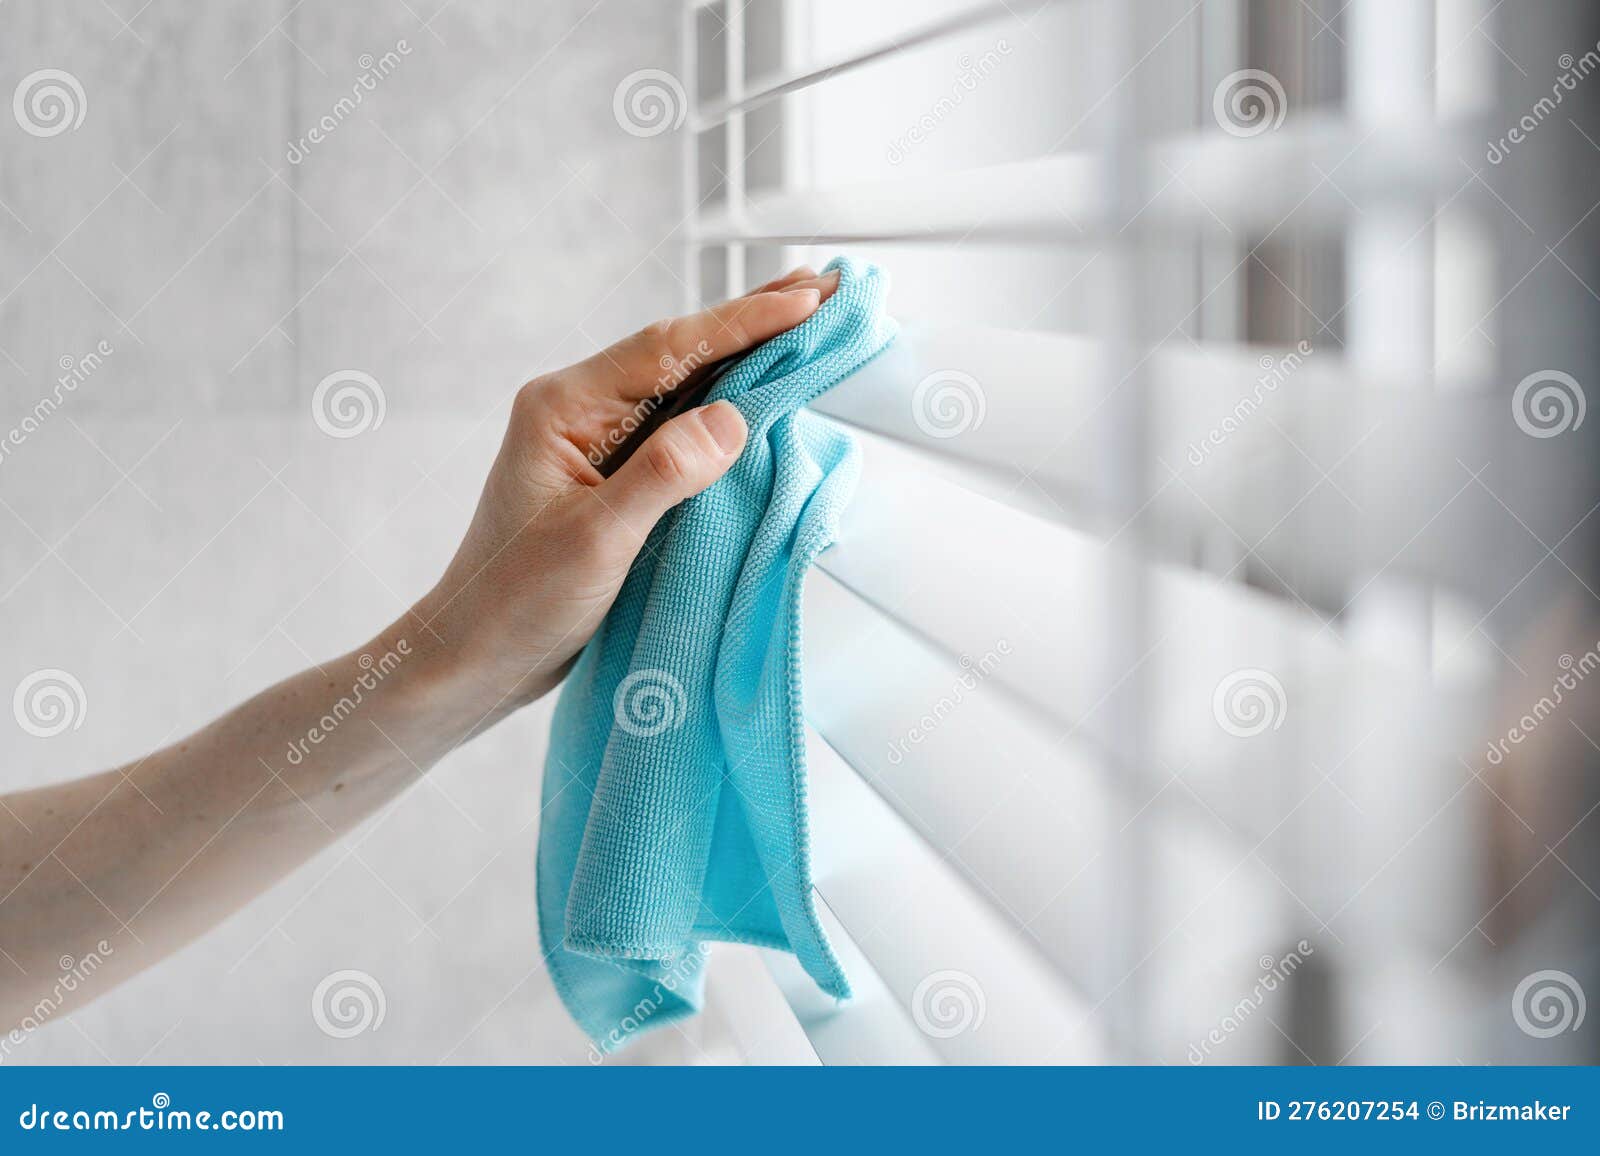 woman hand cleaning window blinds with rag indoors